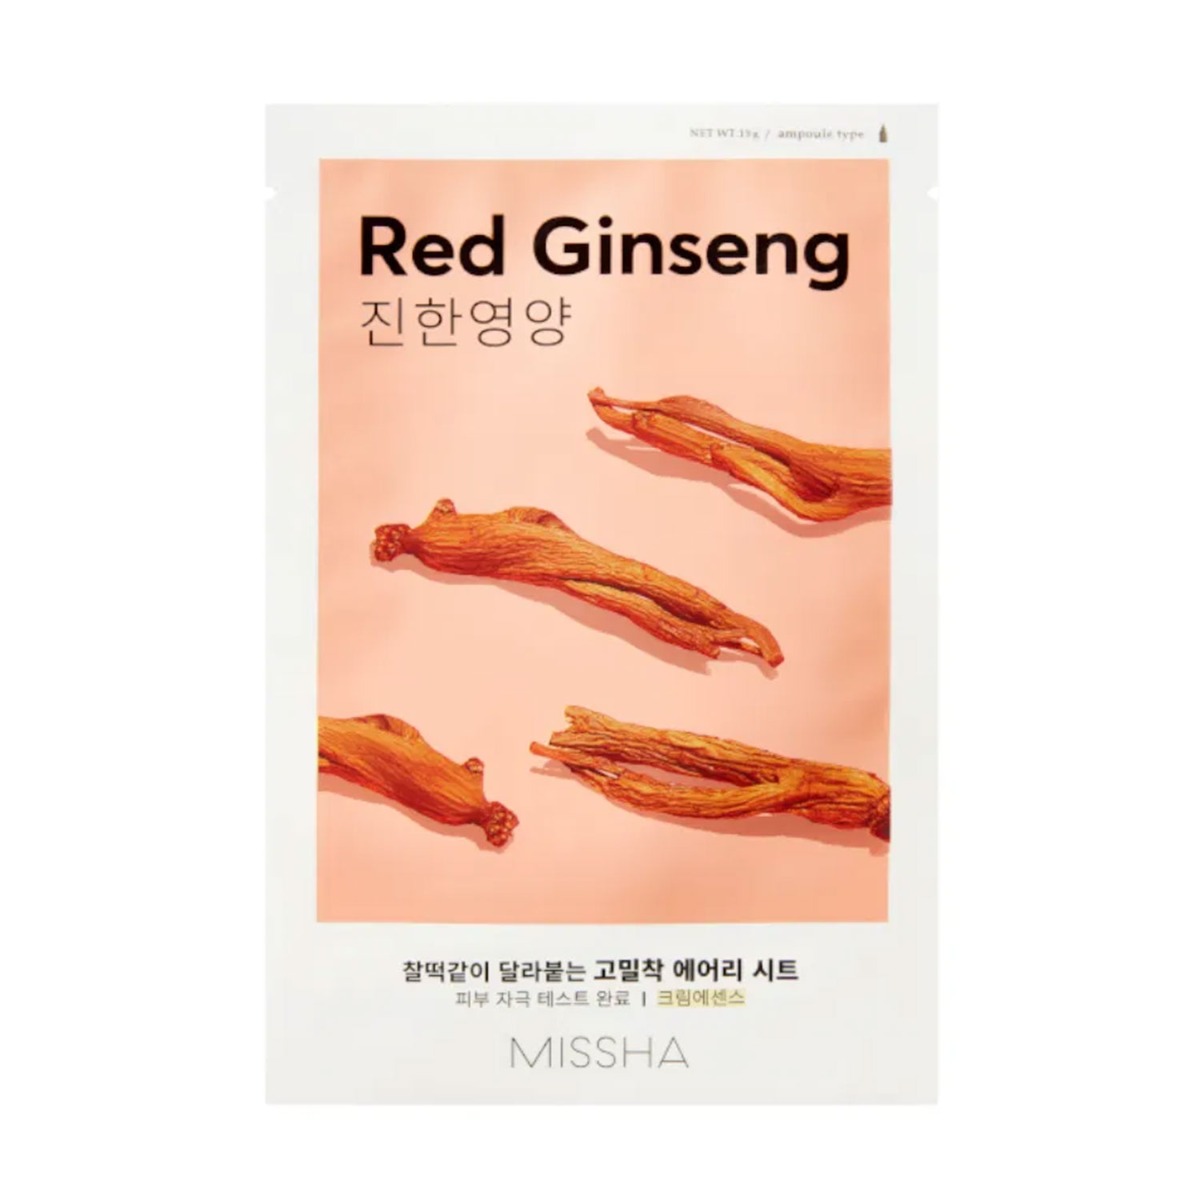 Missha AIry Fit Red Ginseng Sheet Mask, 19gm